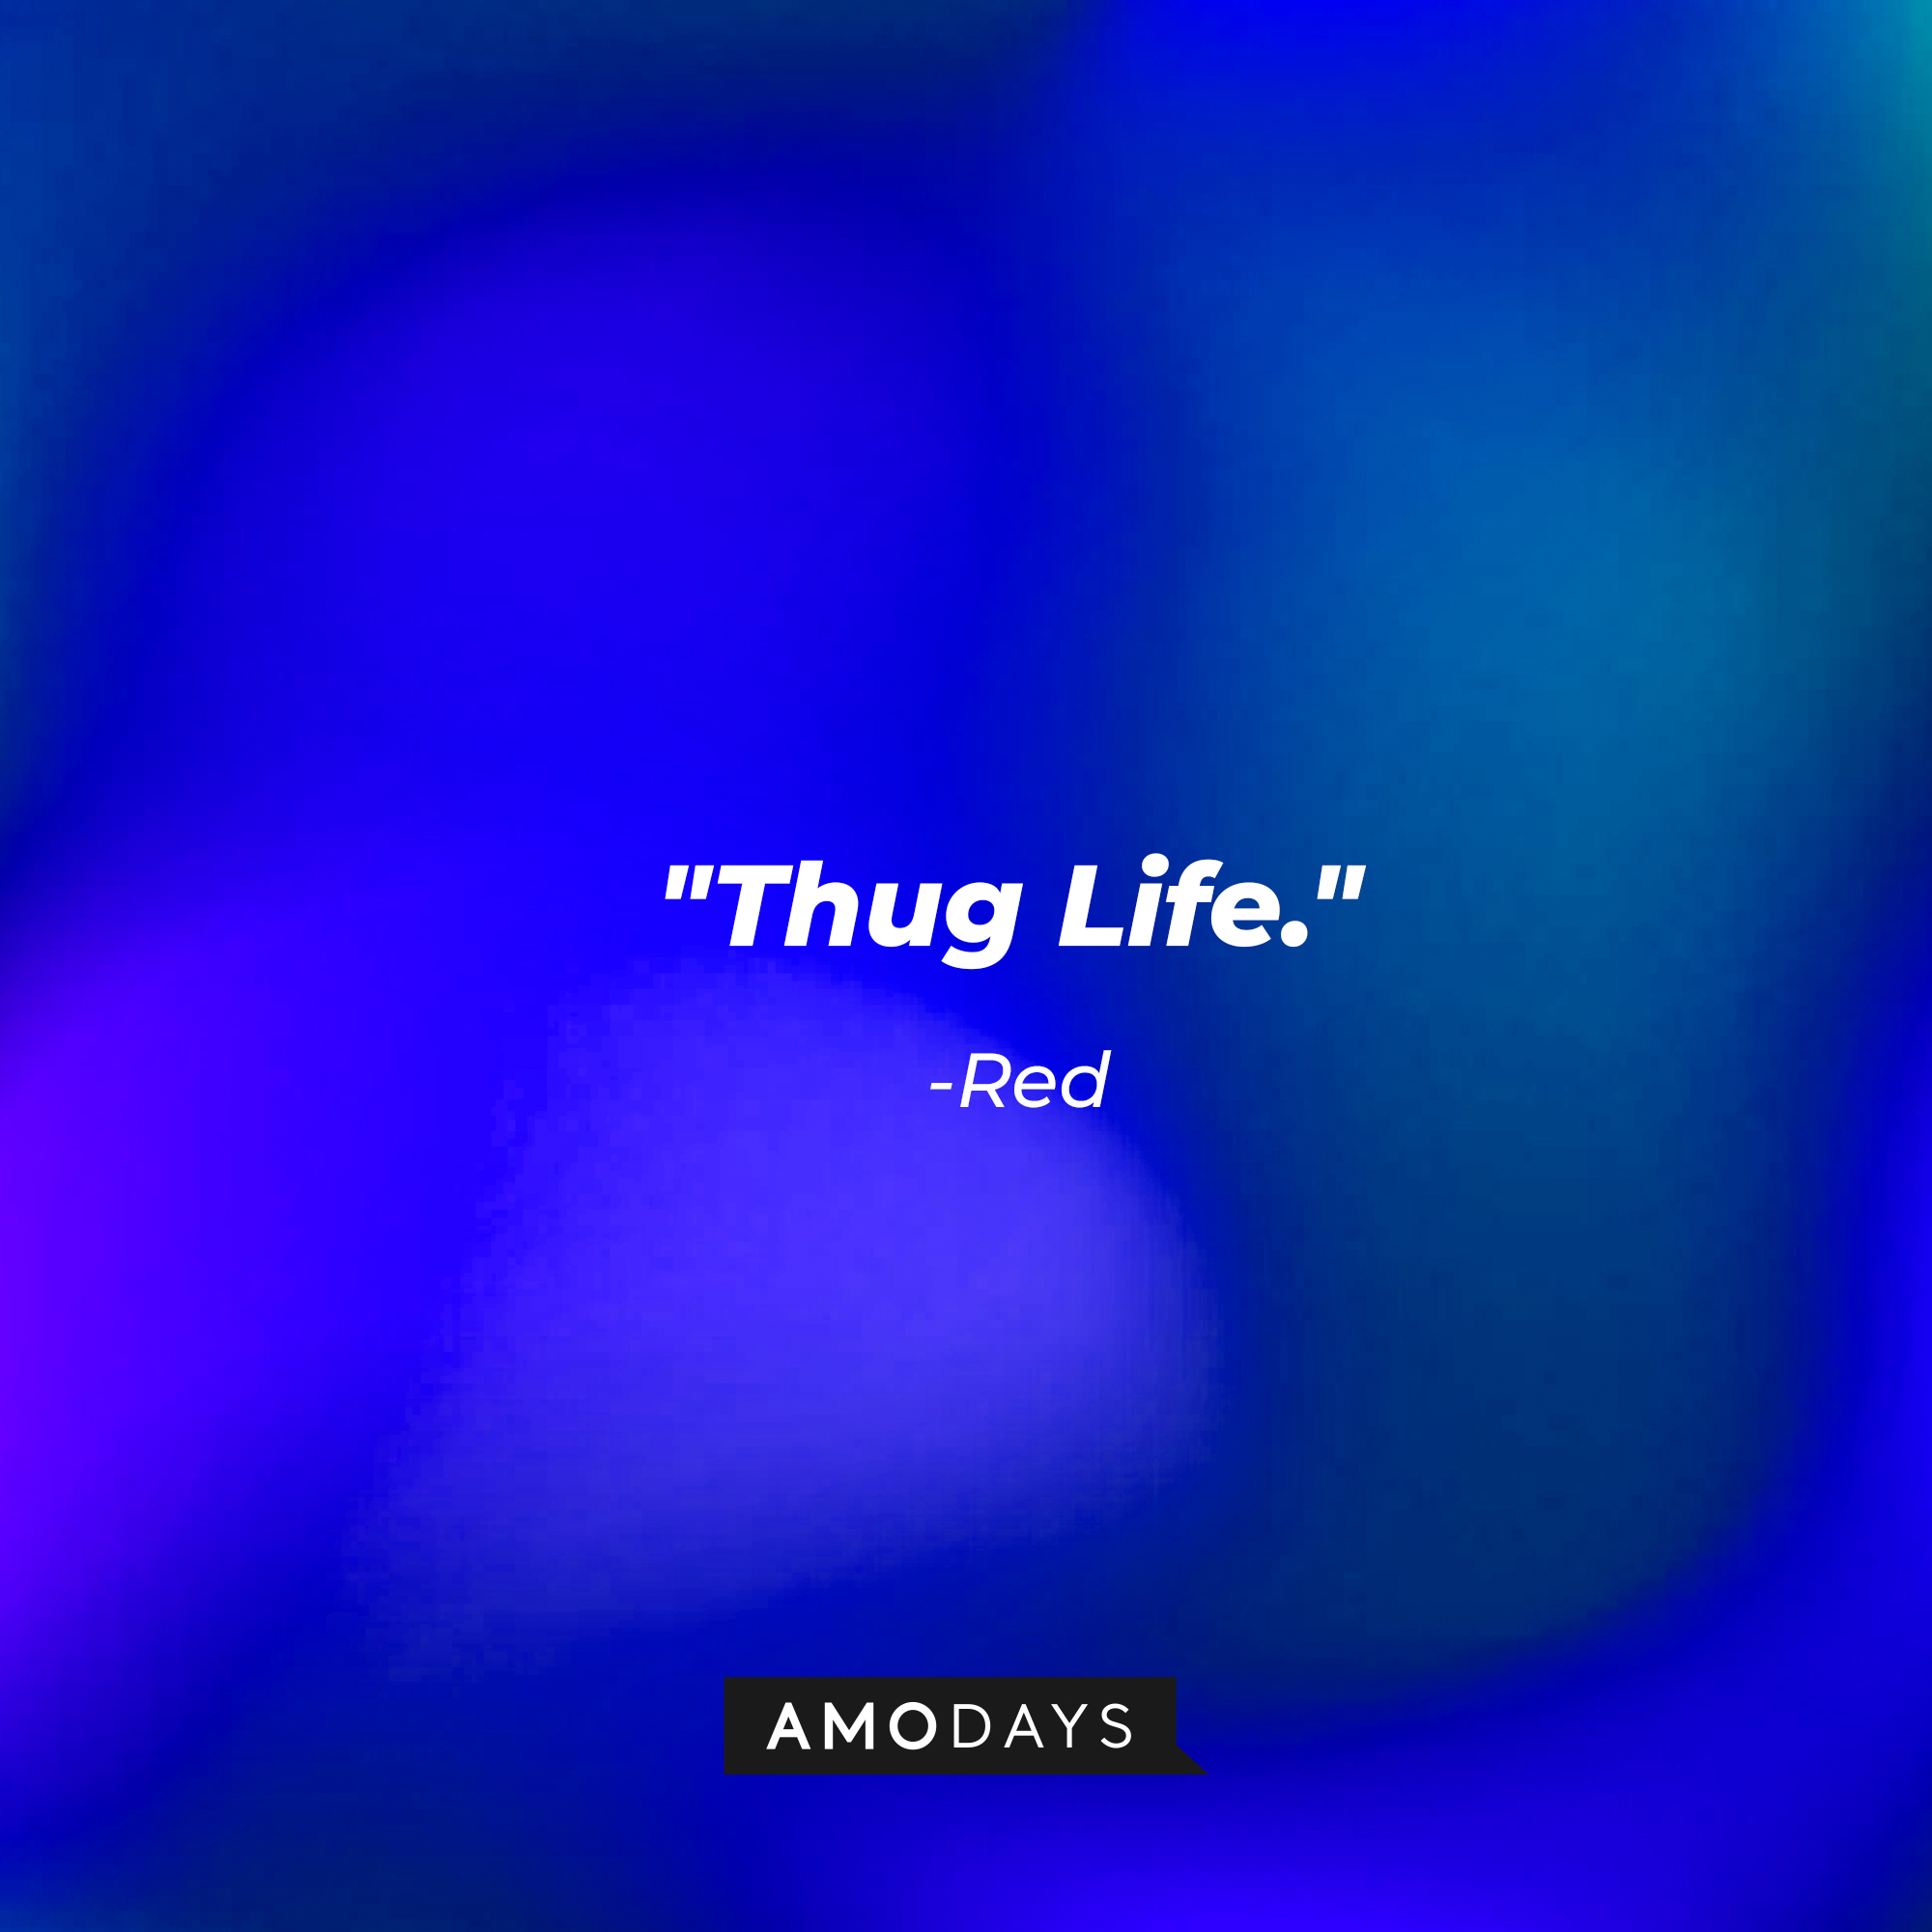 Red's quote: "Thug Life." | Source: AmoDays